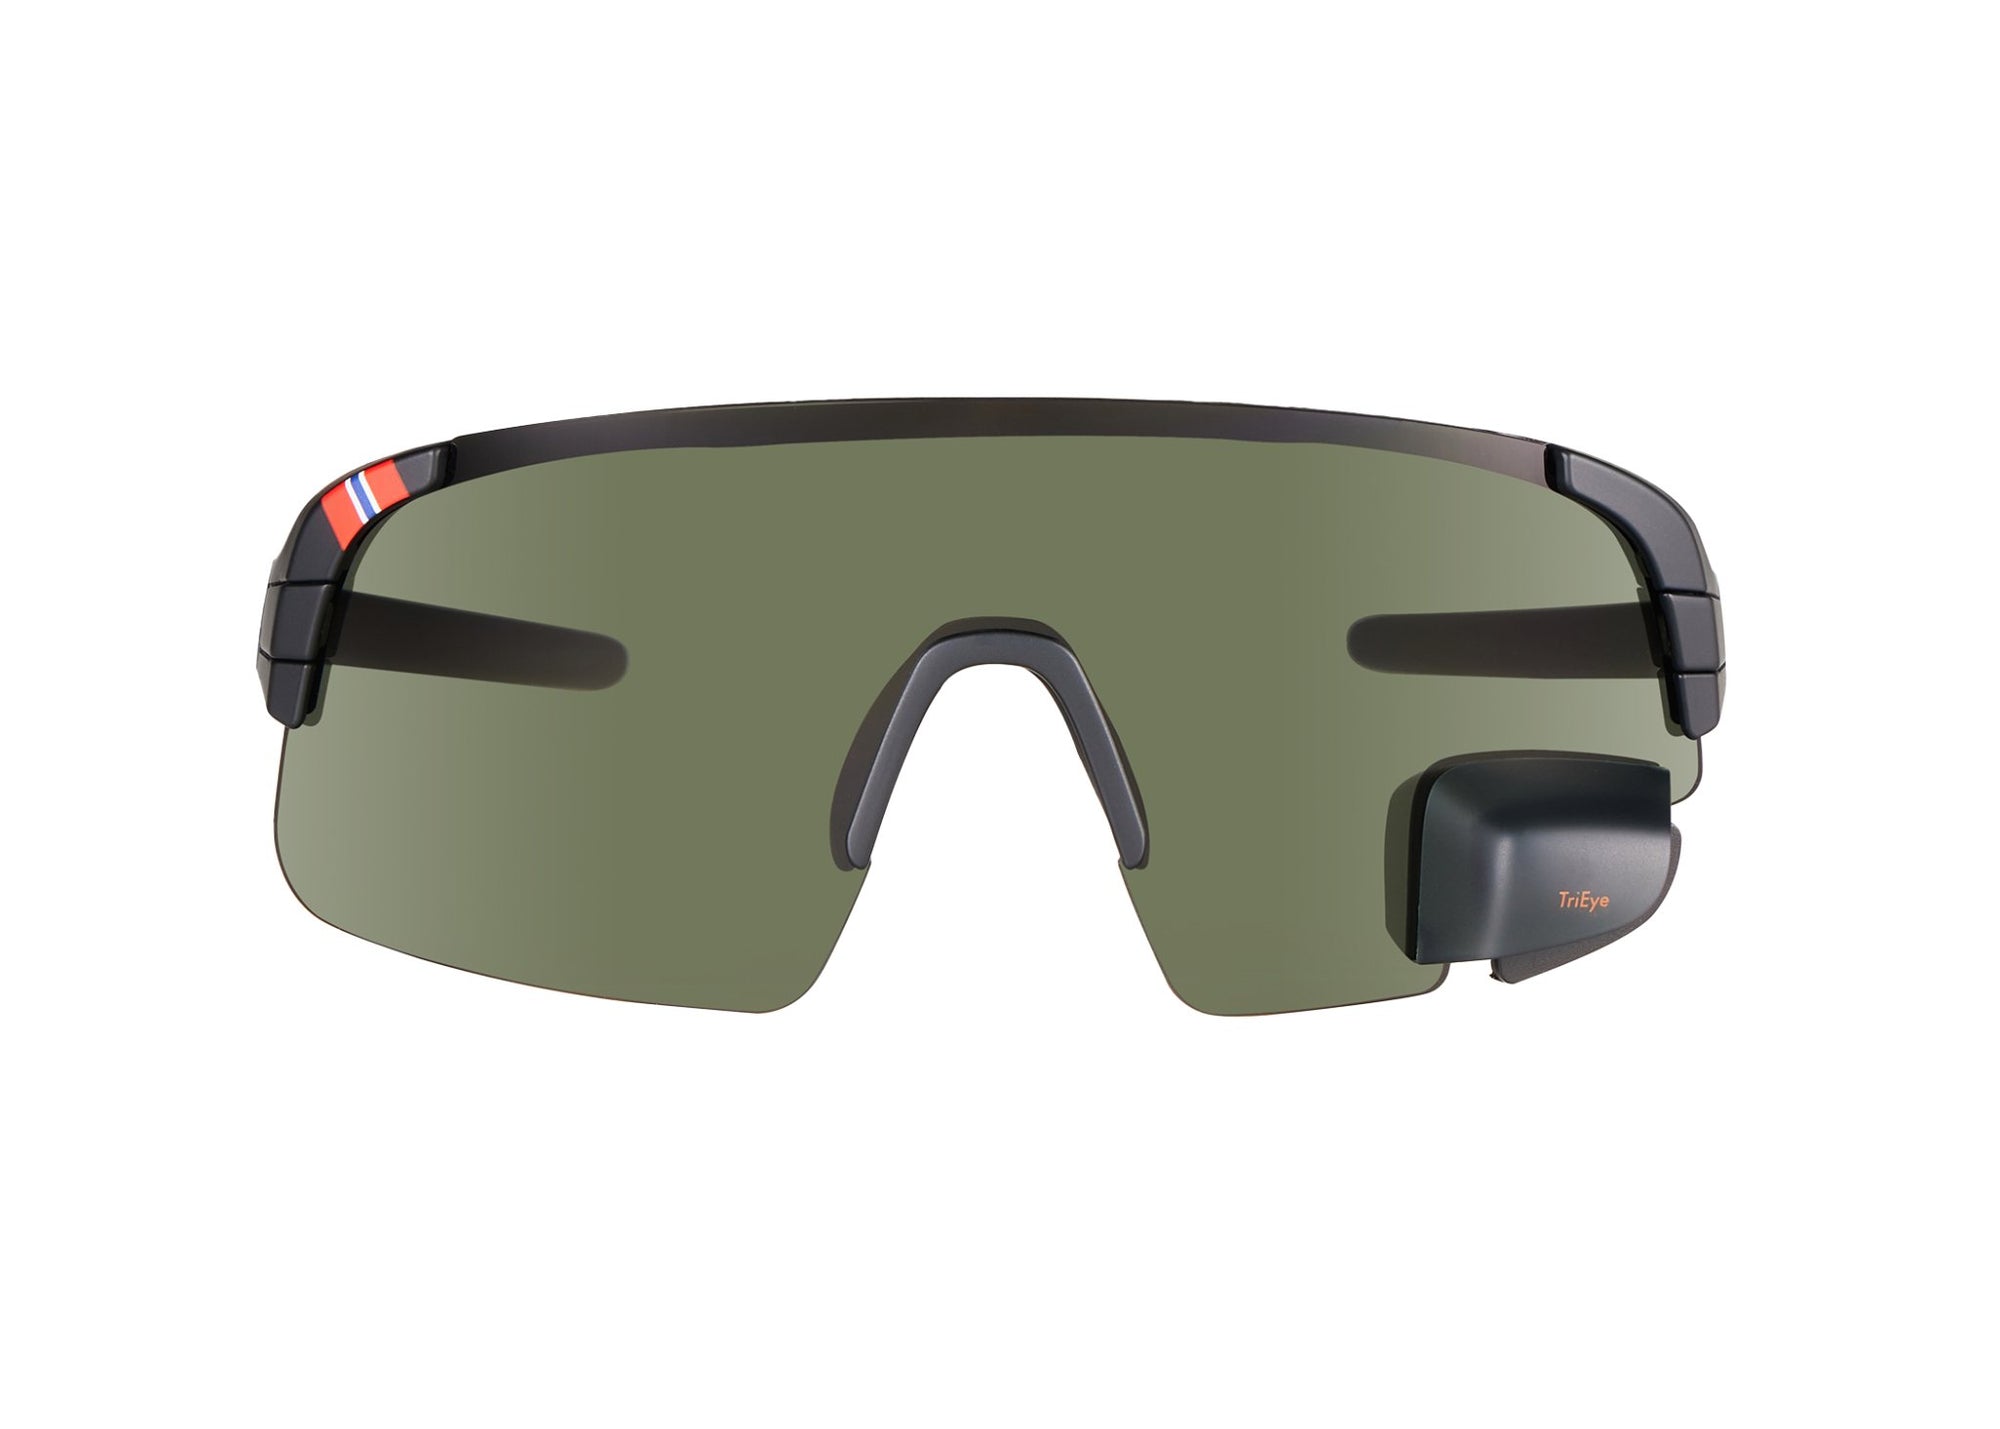 TriEye - View Sport Standard - Cycling Glasses with Mirror - 7090048760403